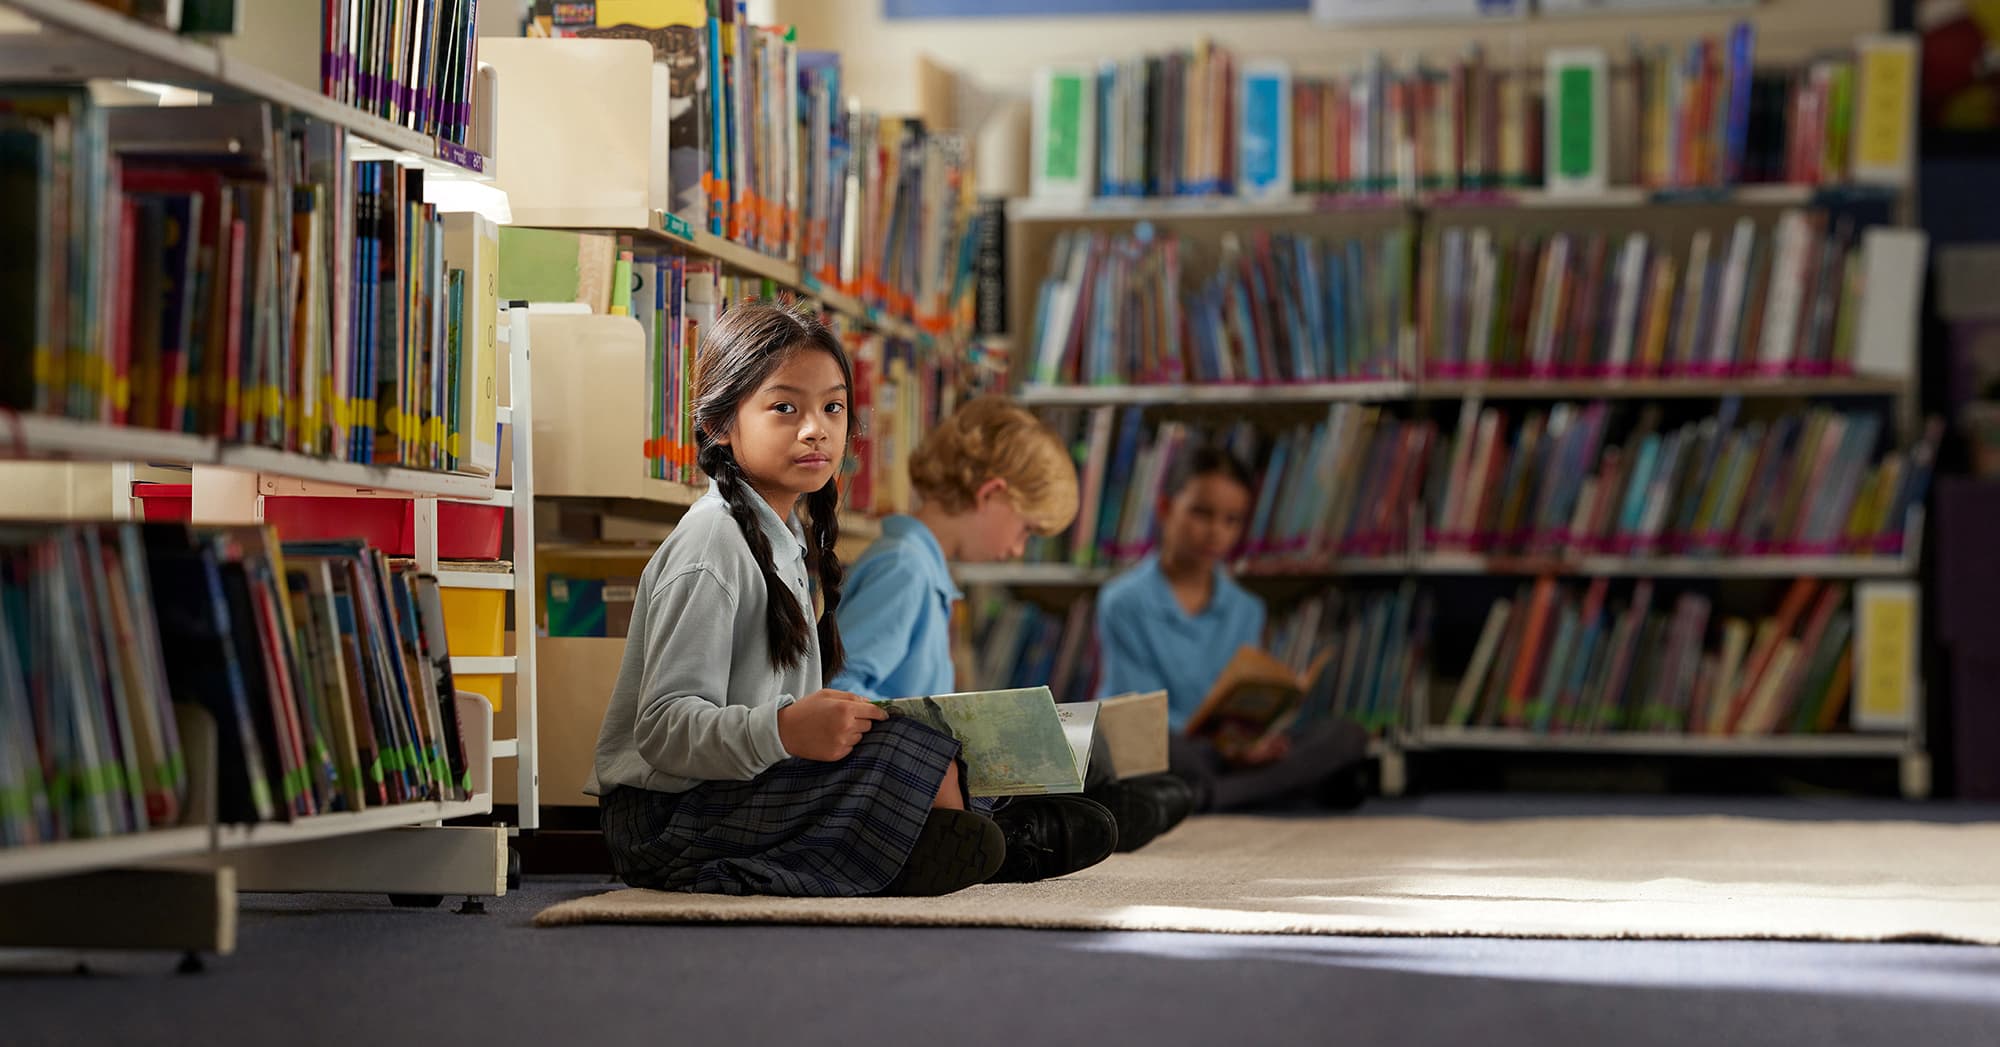 students sitting on the floor of the school library reading books